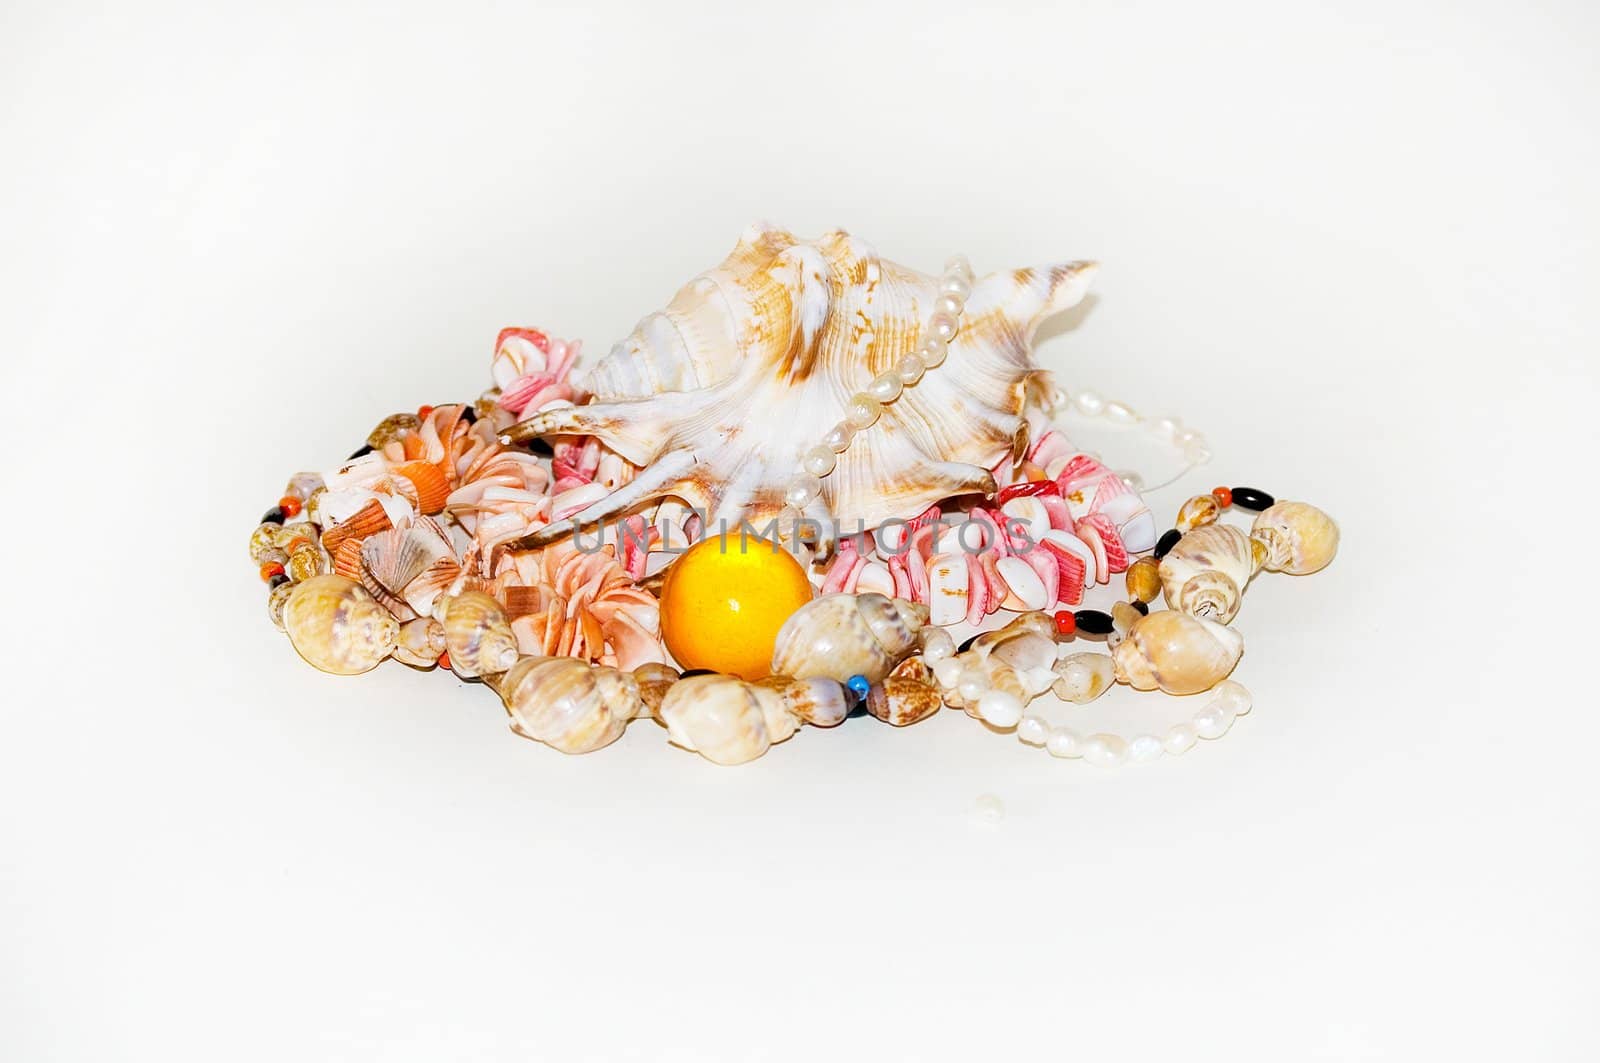  Sea cockleshells on a white background